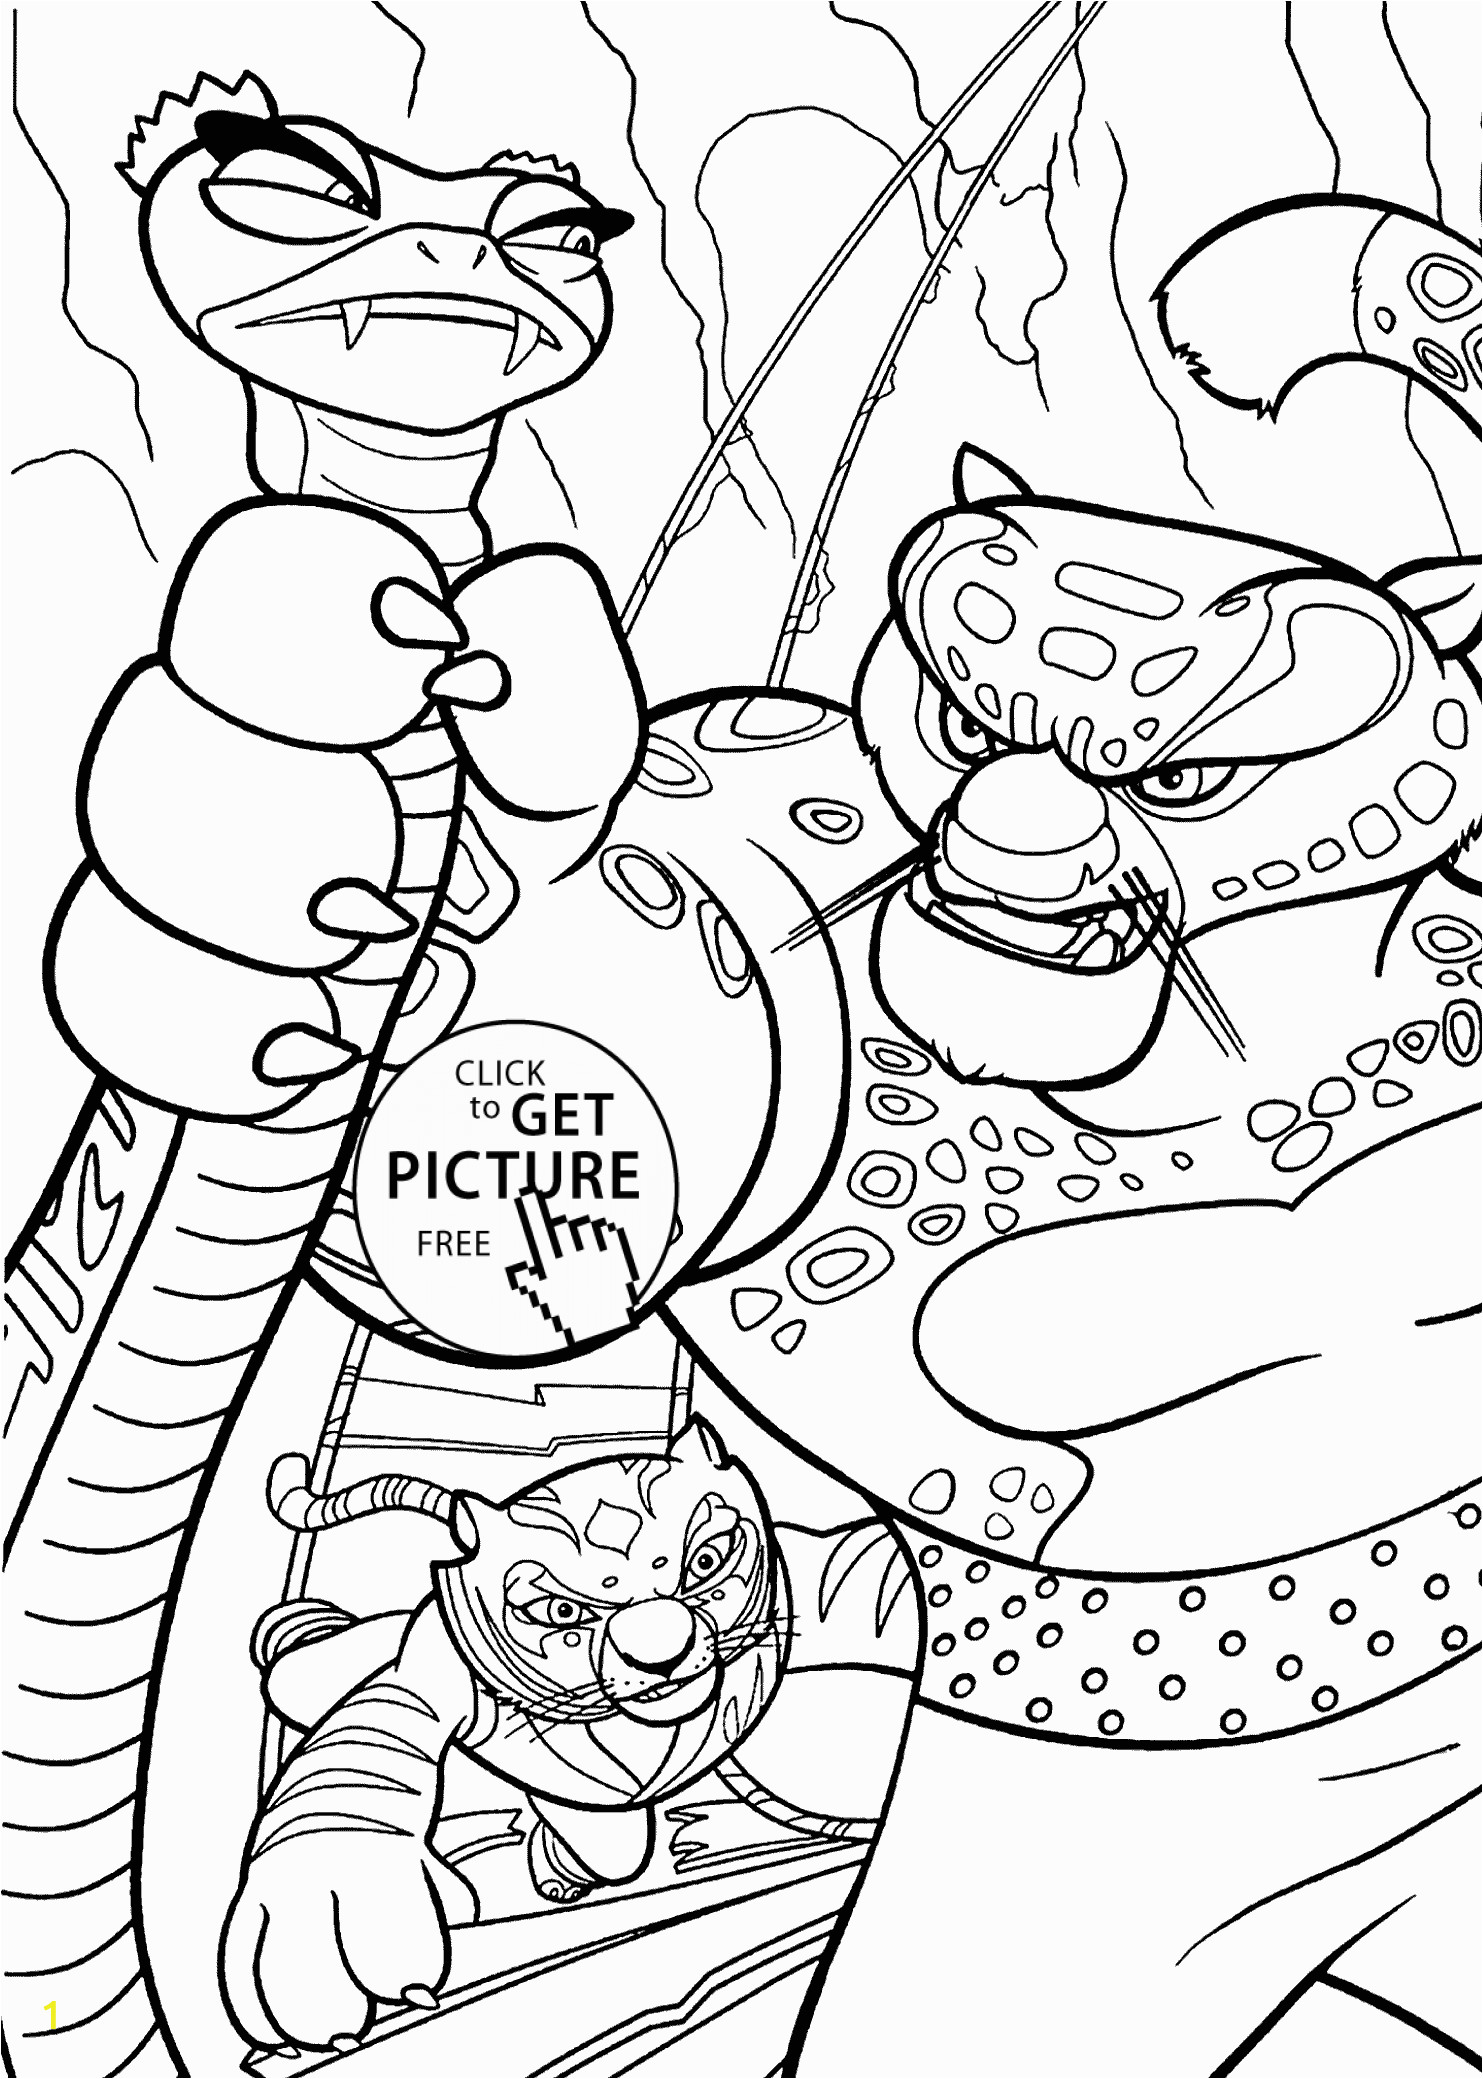 tai lung from kung fu panda coloring pages for kids printable free